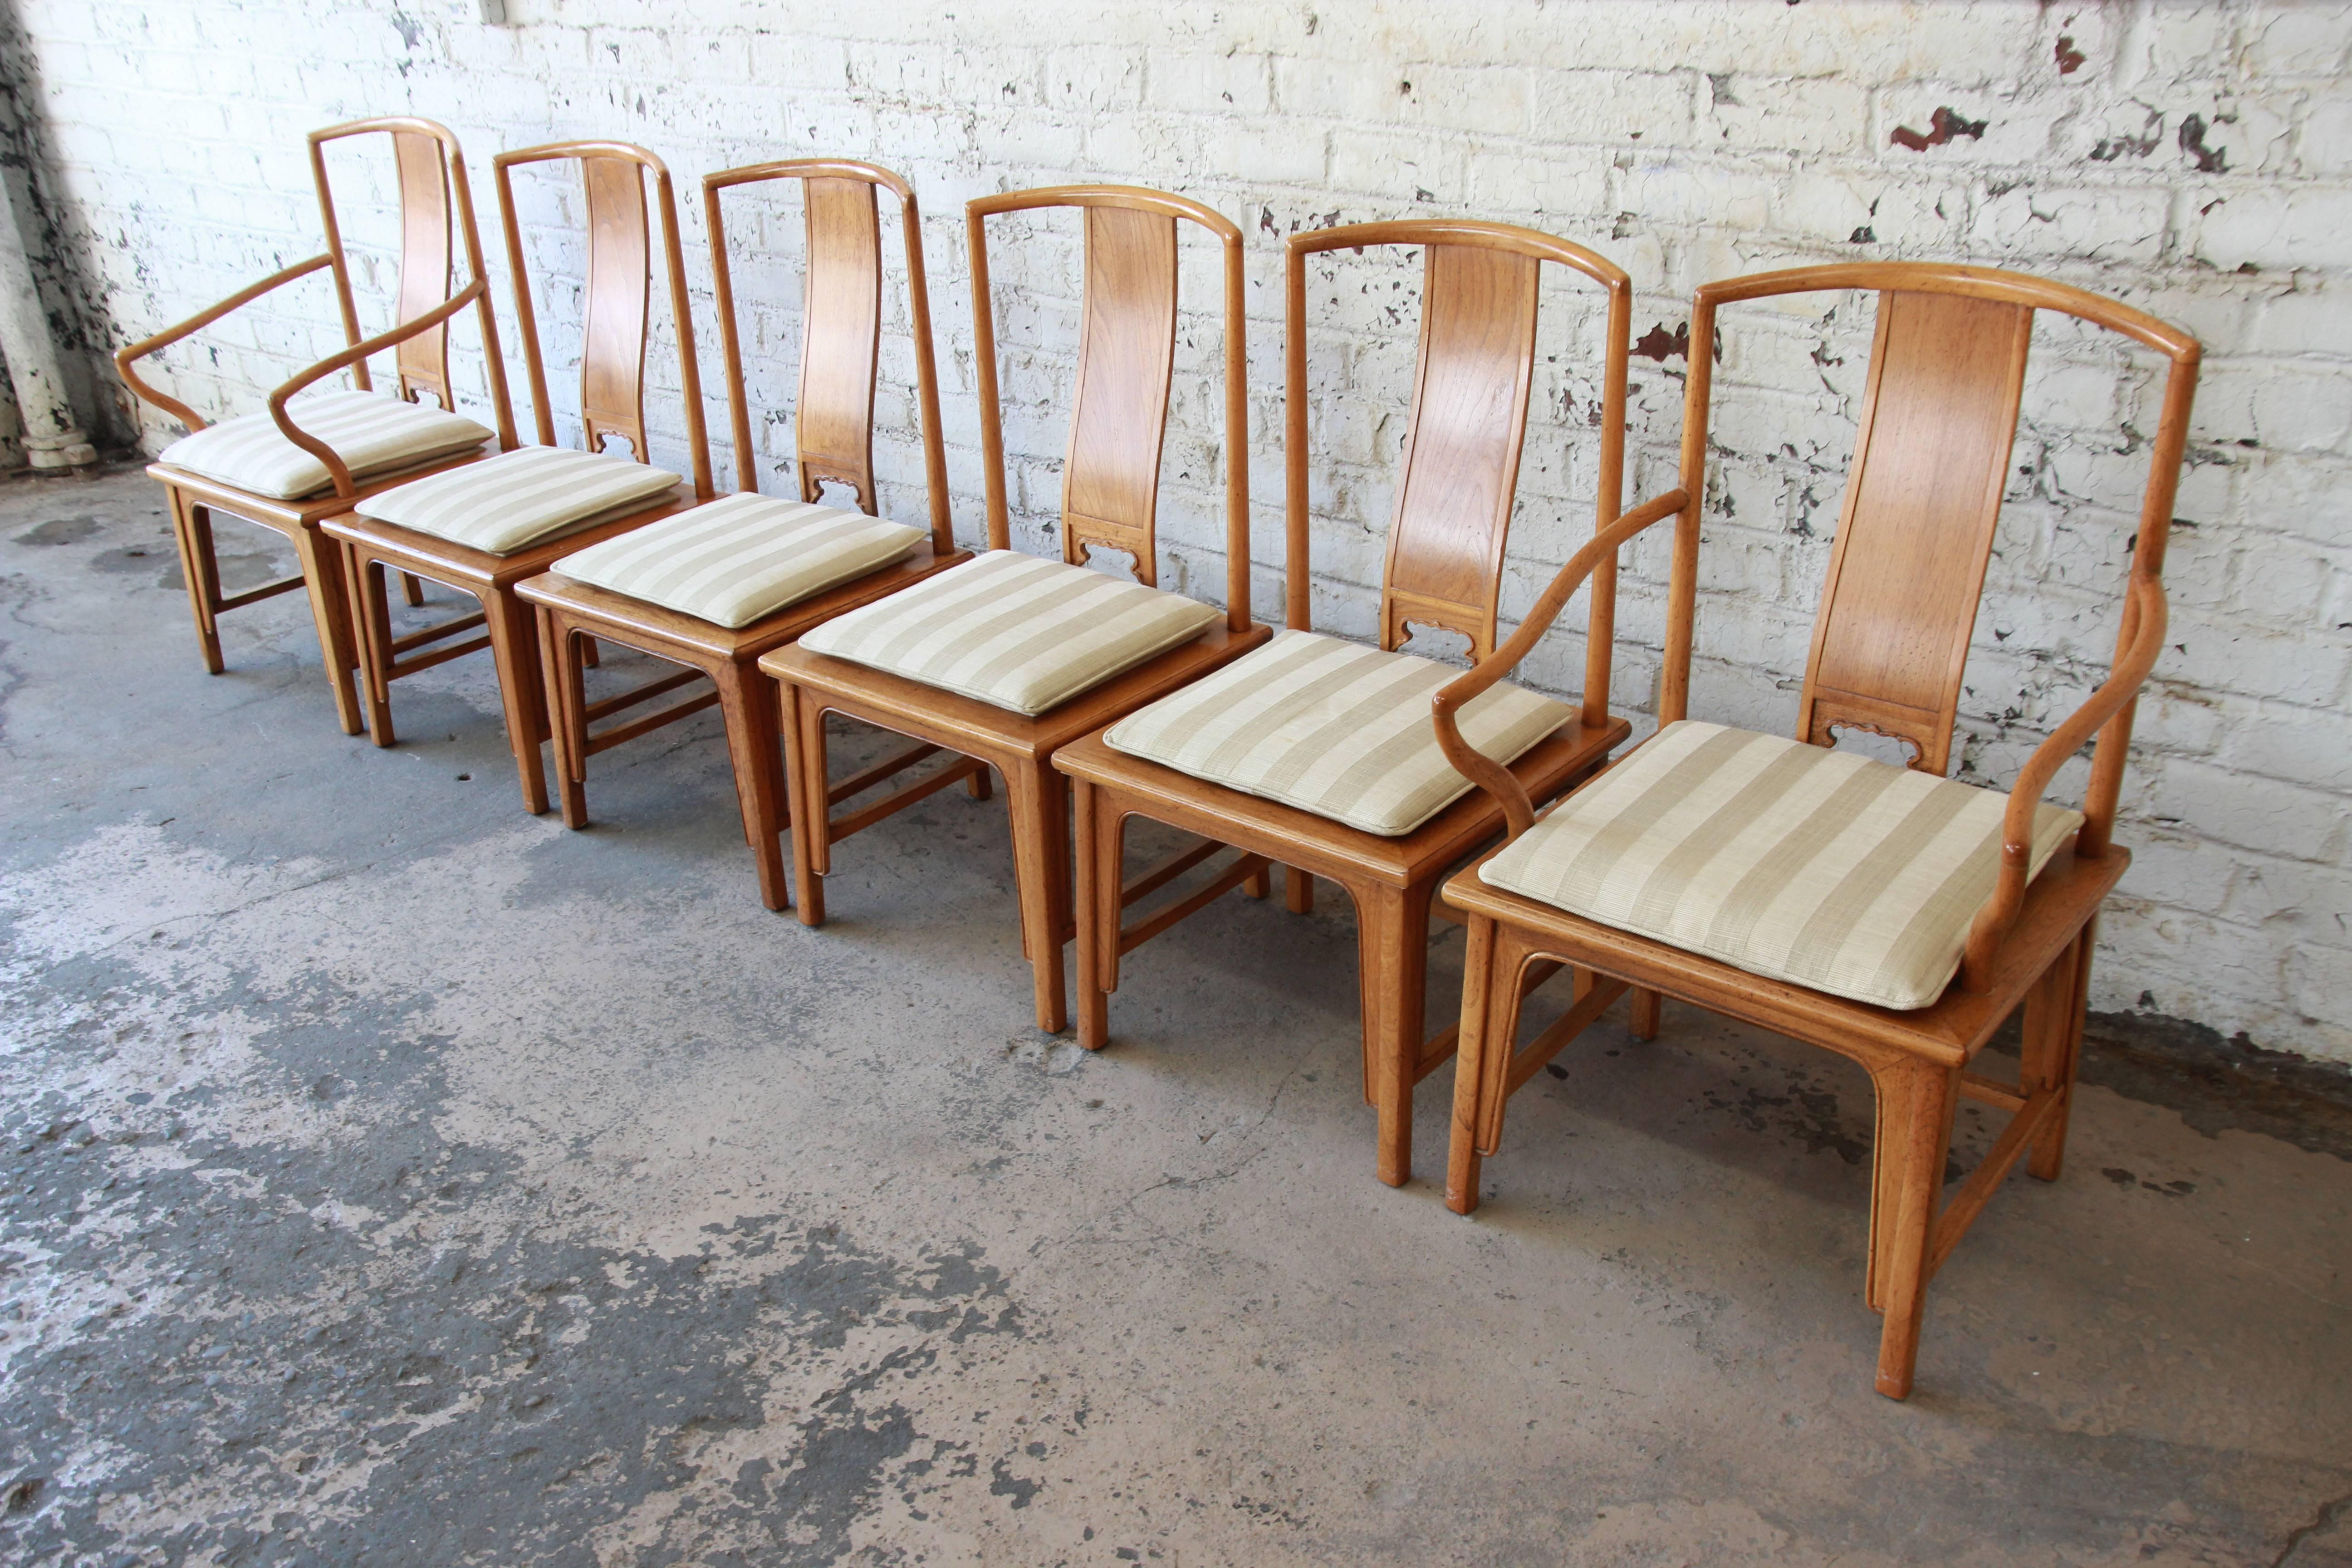 Offering an outstanding set of six Chinoiserie Ming style dining chairs by Baker Furniture. The set includes two captain chairs and four side chairs. The chairs feature solid elm wood construction, high curved backs, and a nice Asian flair. The